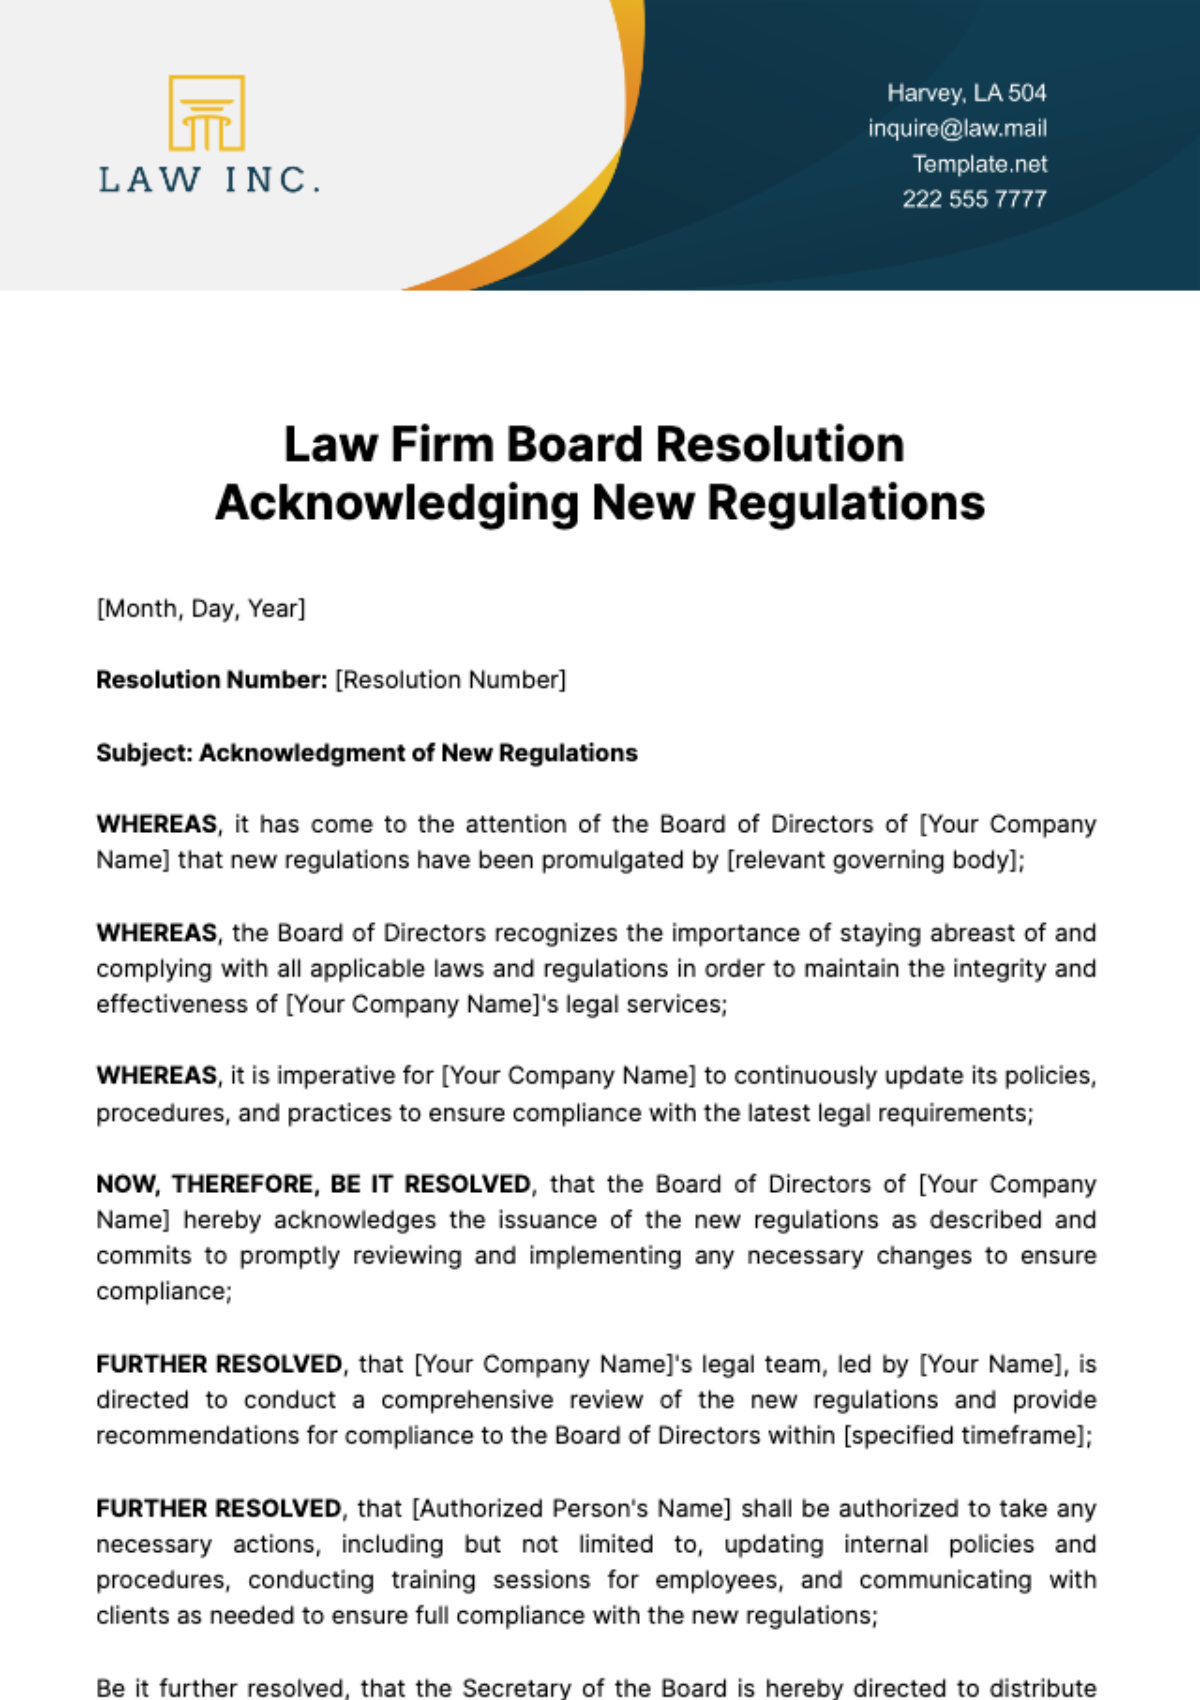 Free Law Firm Board Resolution Acknowledging New Regulations Template